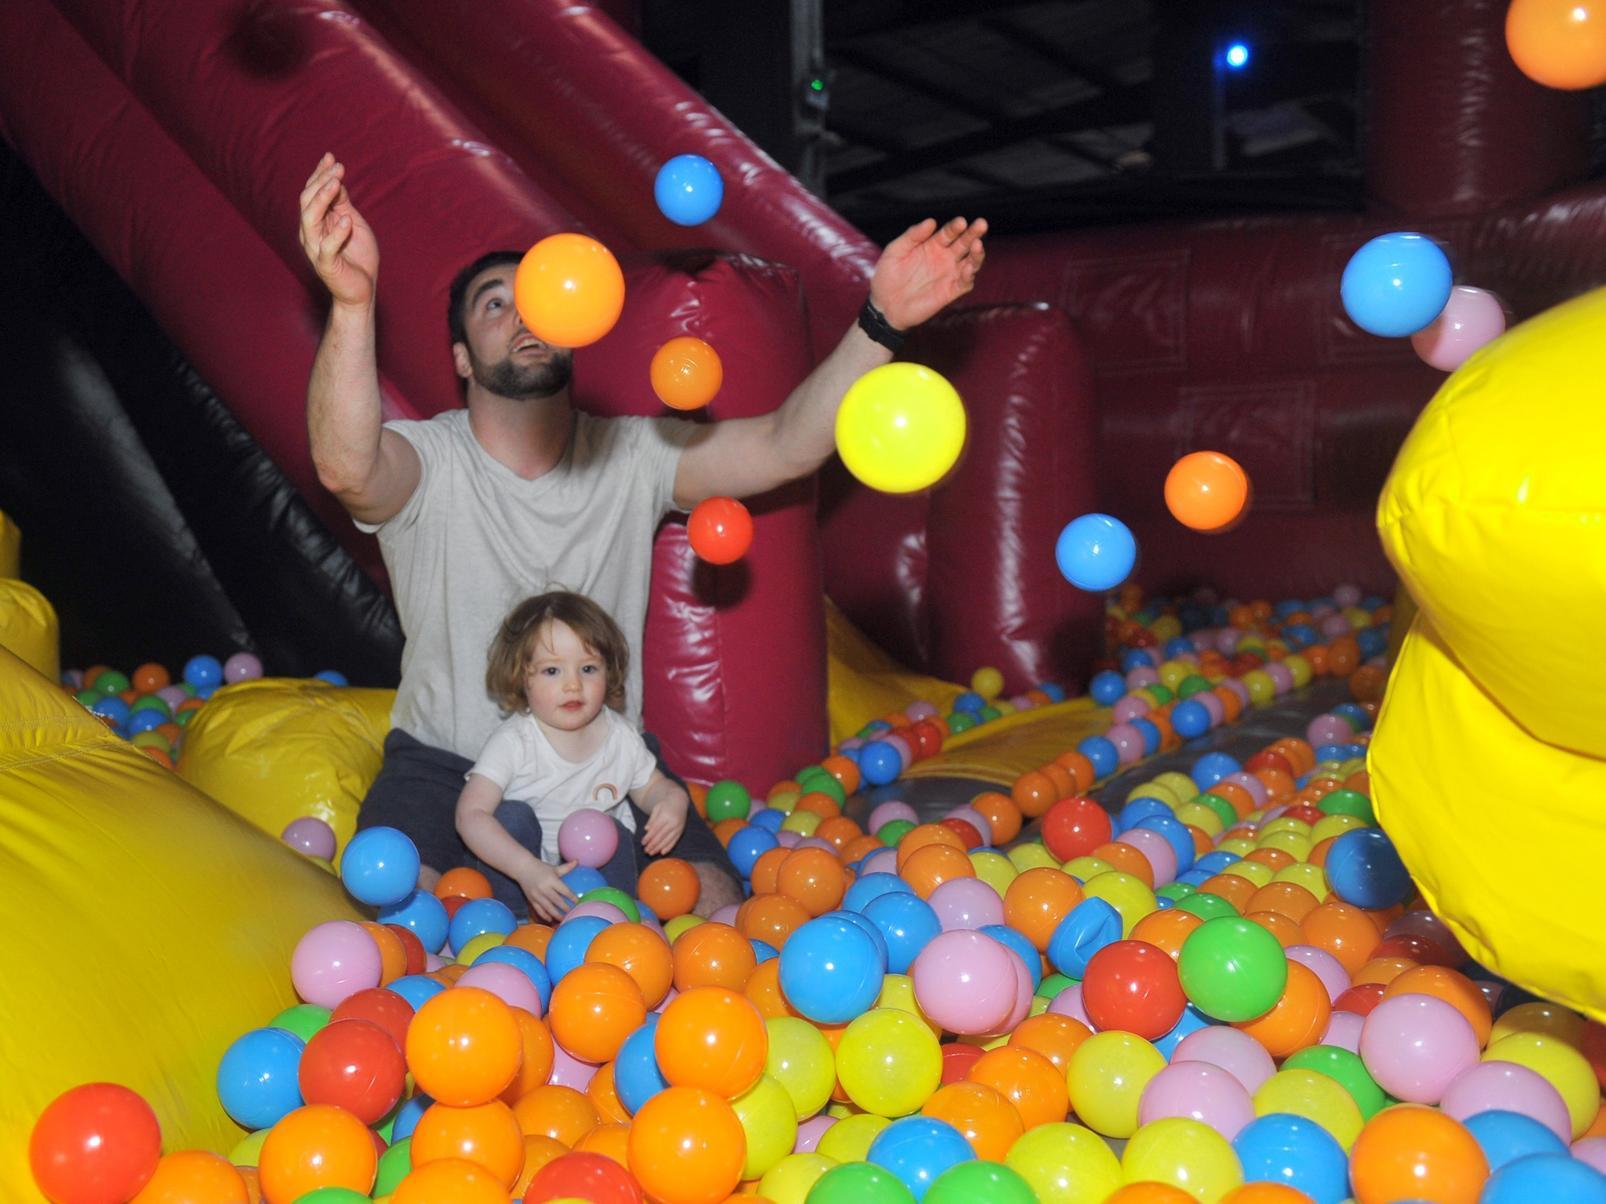 Just down the road in Leeds is Jump Inc, an indoor trampoline and inflatables park - perfect for days when the weather isn't great.